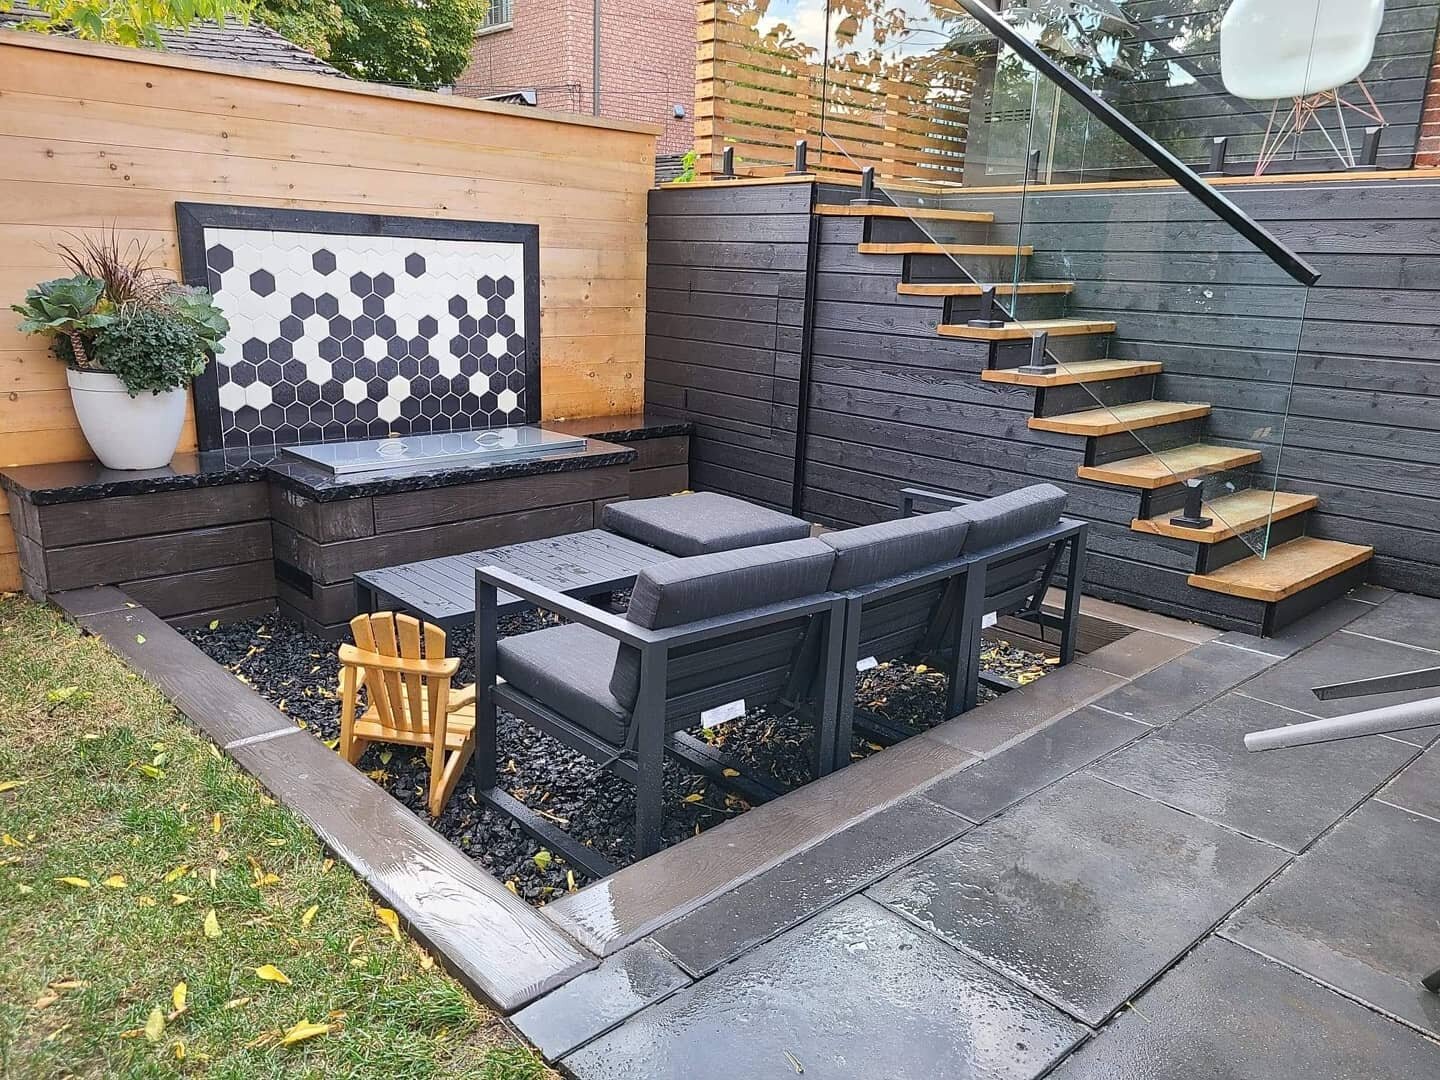 Look at this beauty🌹

Back yard complete with techo bloc Blu grande patio, borealis fire pit capped with natural stone &amp; maibec siding &amp; Louvre system below deck. Also a cool tile heat resistant protector for the fire pit👷 #kingsgrovecontra